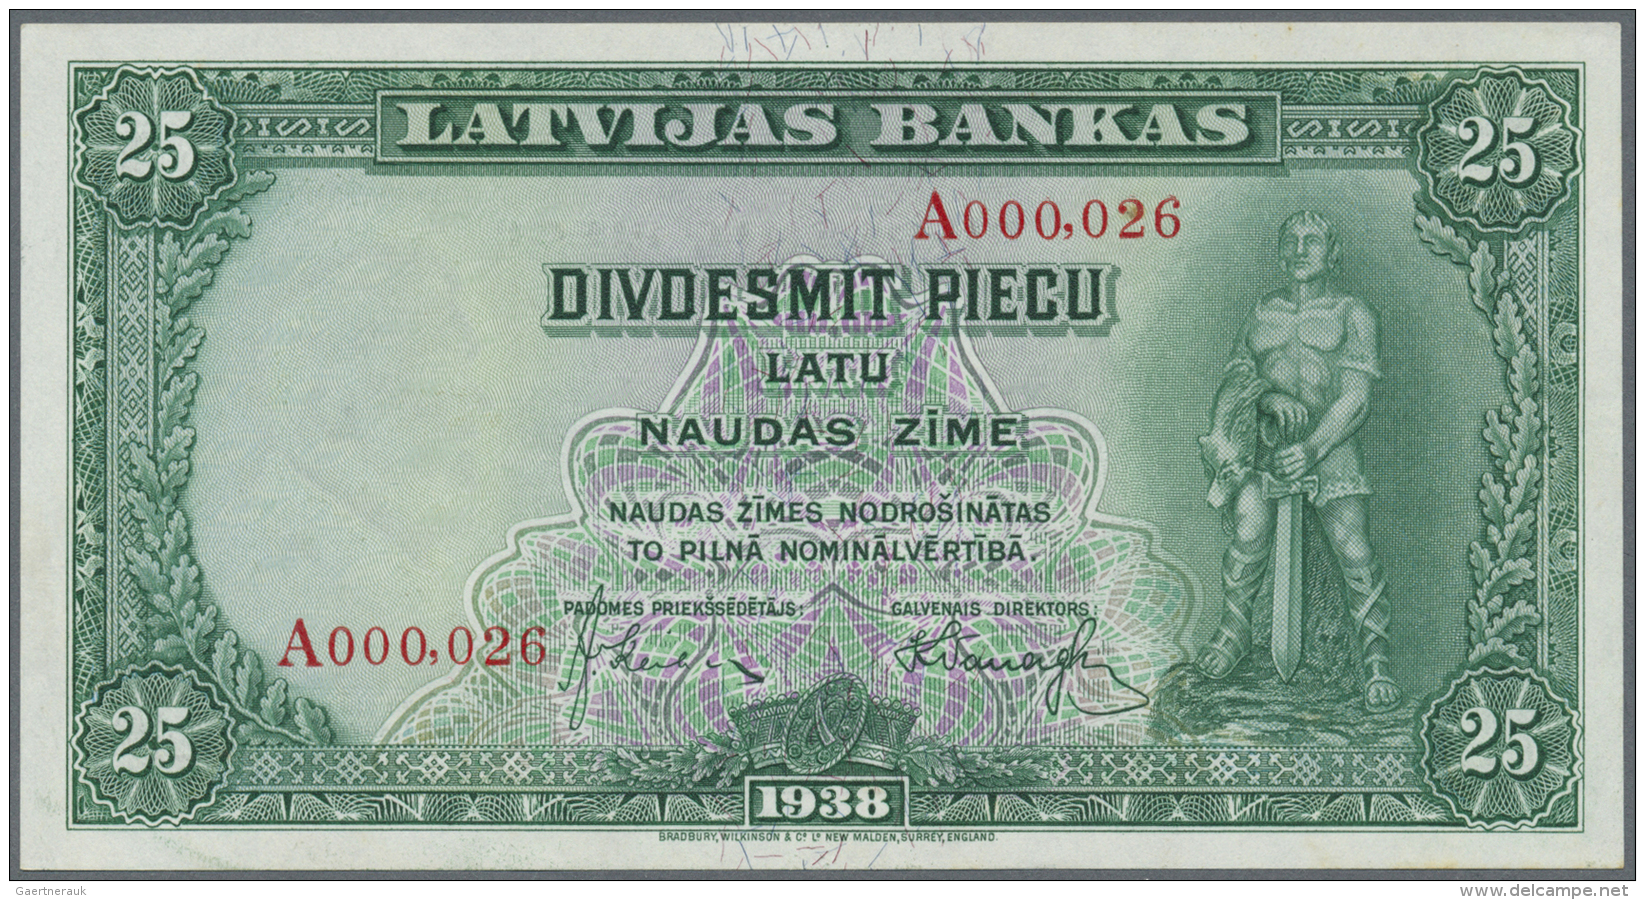 Latvia /Lettland: 25 Latu 1938 P. 21, Issued Note, Series A, Low Serial #A000.026, Only One Very Light Corner Dint, Othe - Lettonia